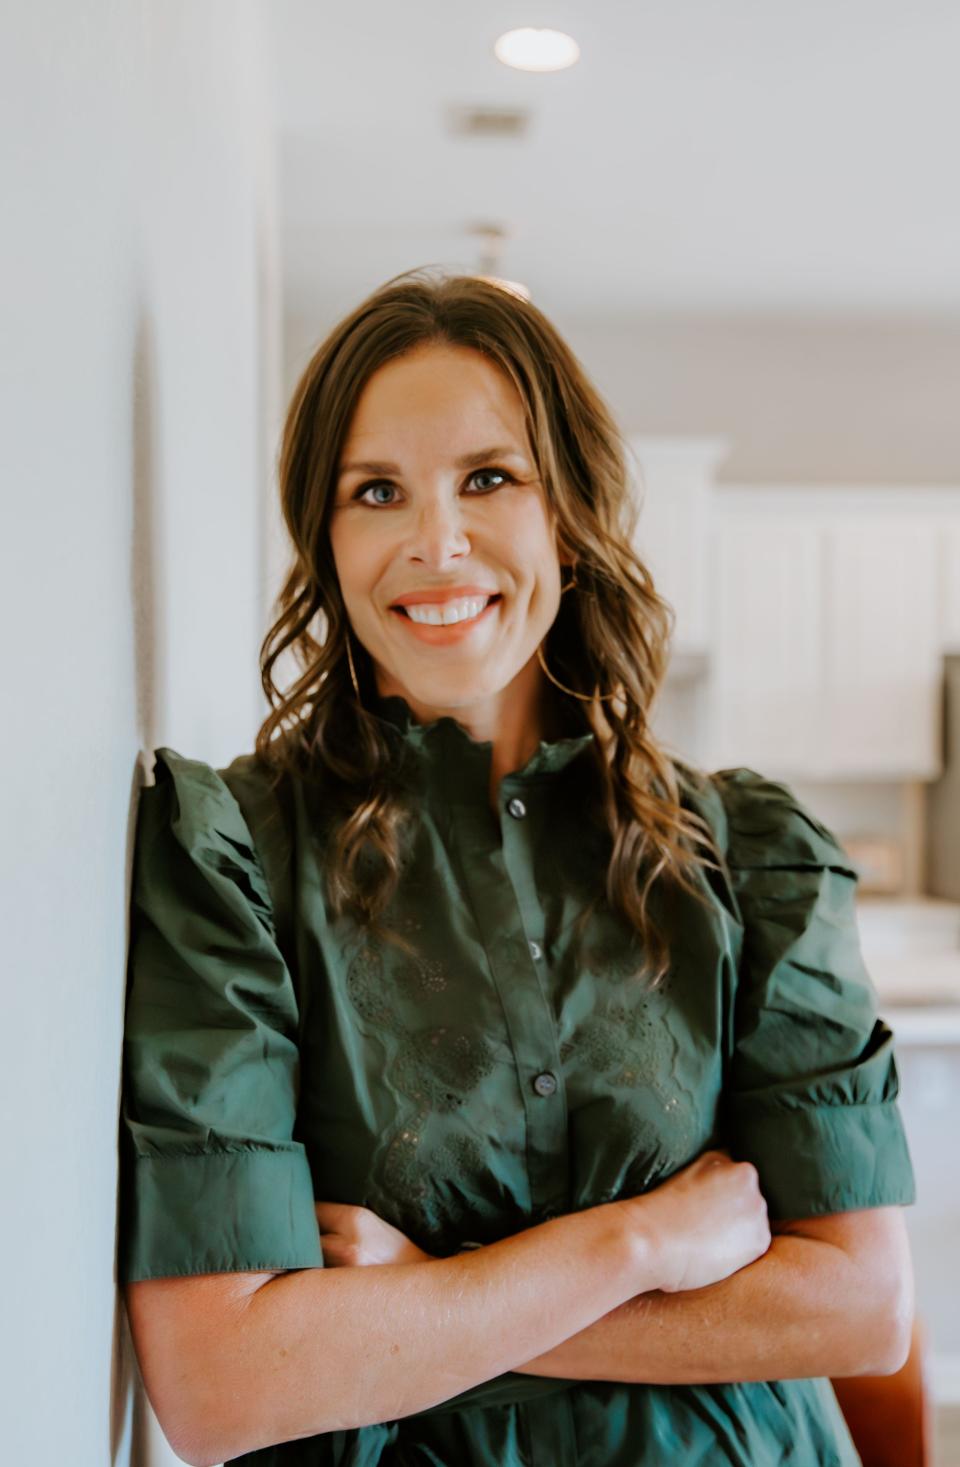 The Austin American-Statesman announced Thursday, Aug. 24, 2023, that Andrea Vick has been named General Manager for the Austin market.